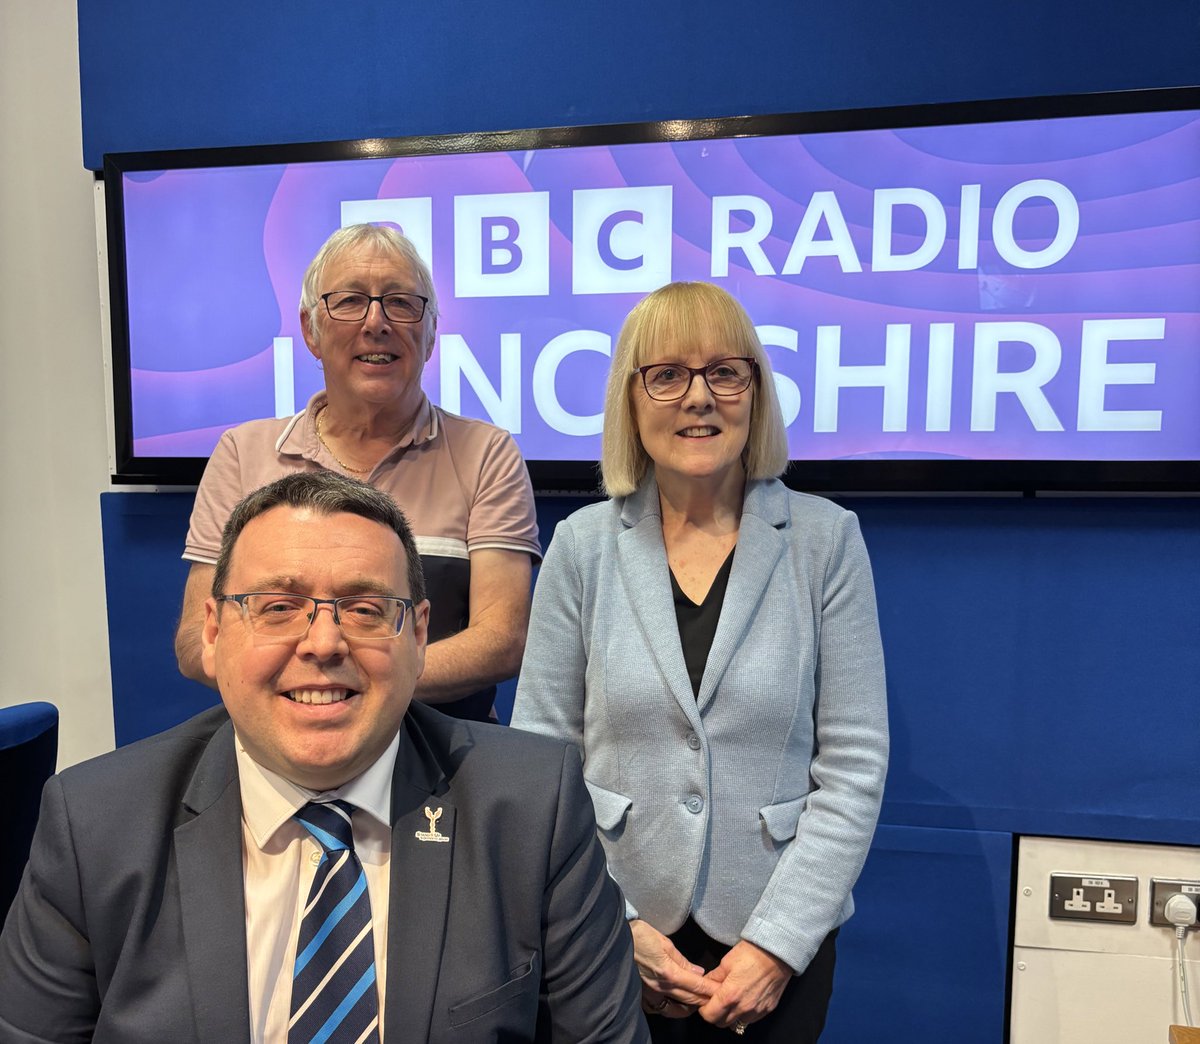 Thanks very much to Joe Wilson and @BBCLancashire for having me on this morning with Rowan Mellalieu from the Family Mediation Consortium to speak about Family Mediation Week 2024. #FamilyMediationWeek #Law #Legal #Mediation #FamilyMediation